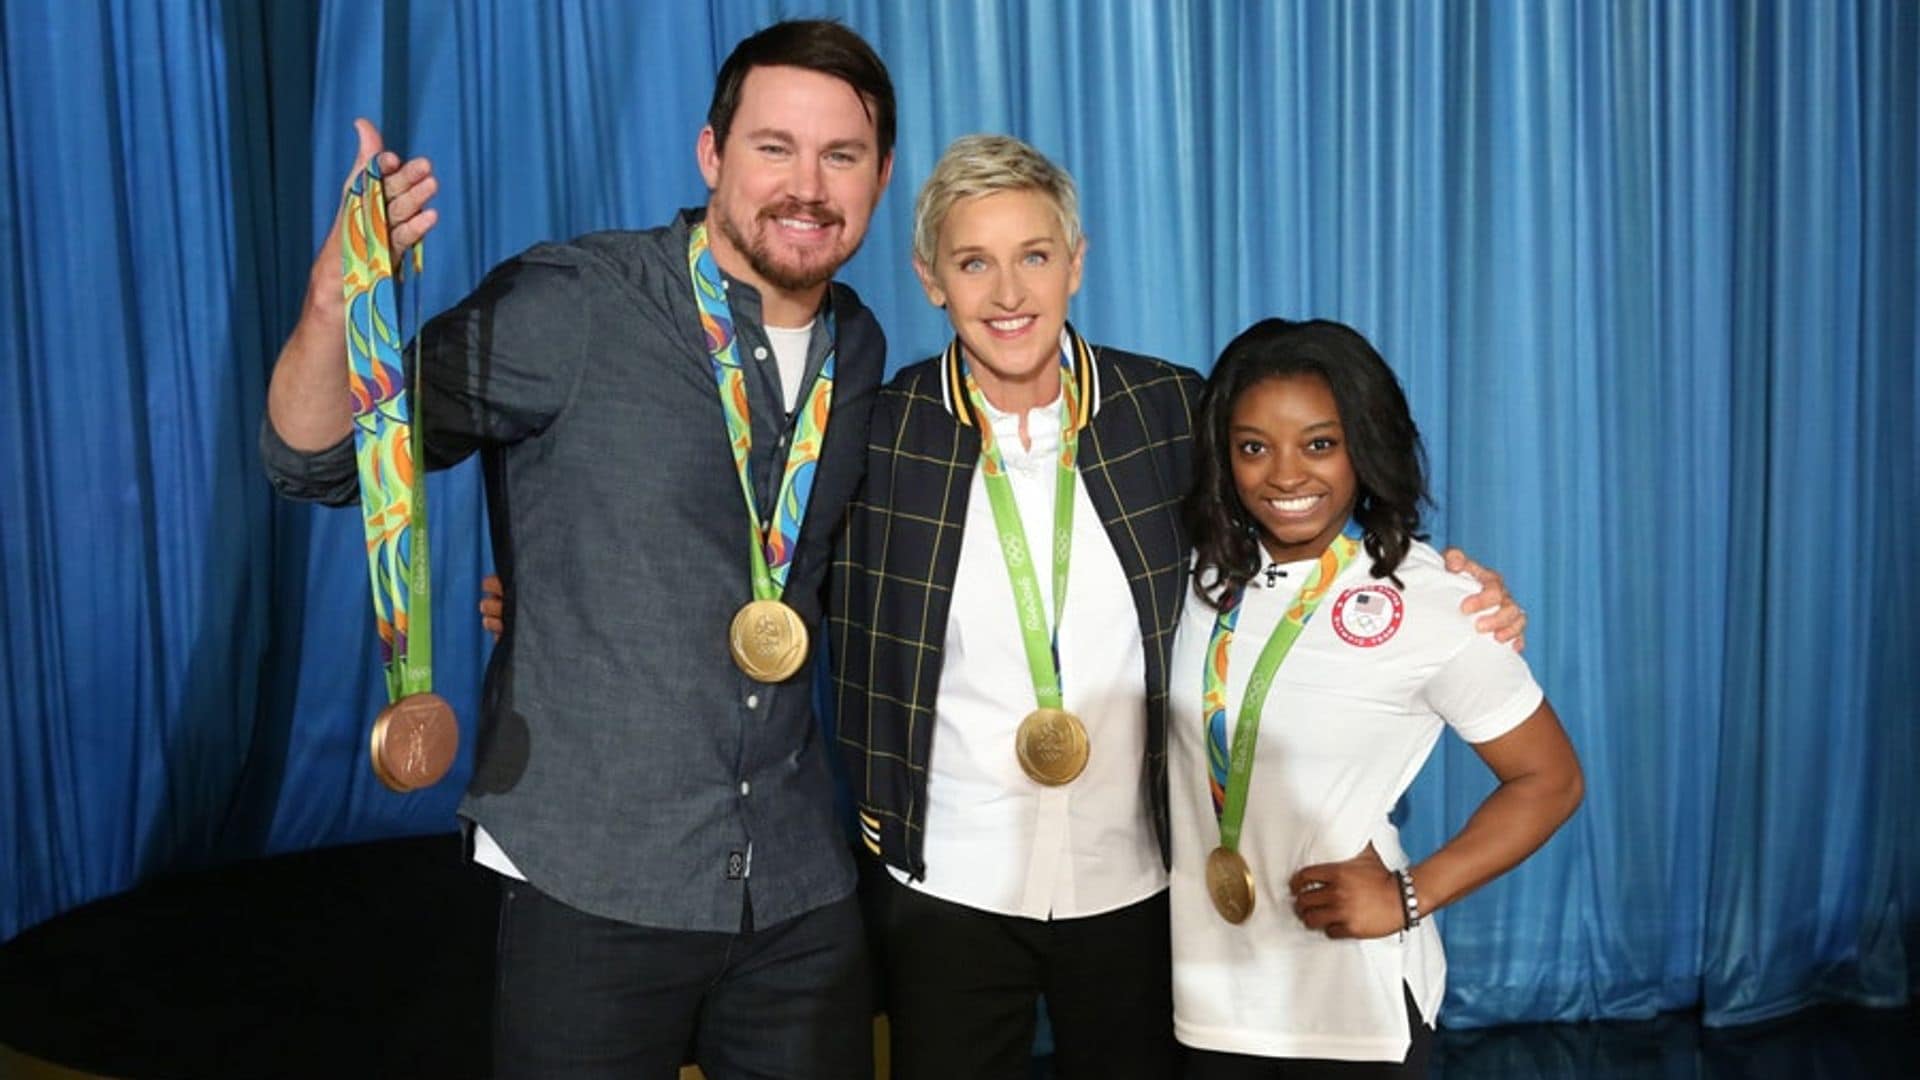 Find out what Simone Biles offered to do for Kim Kardashian and how Channing Tatum surprised her